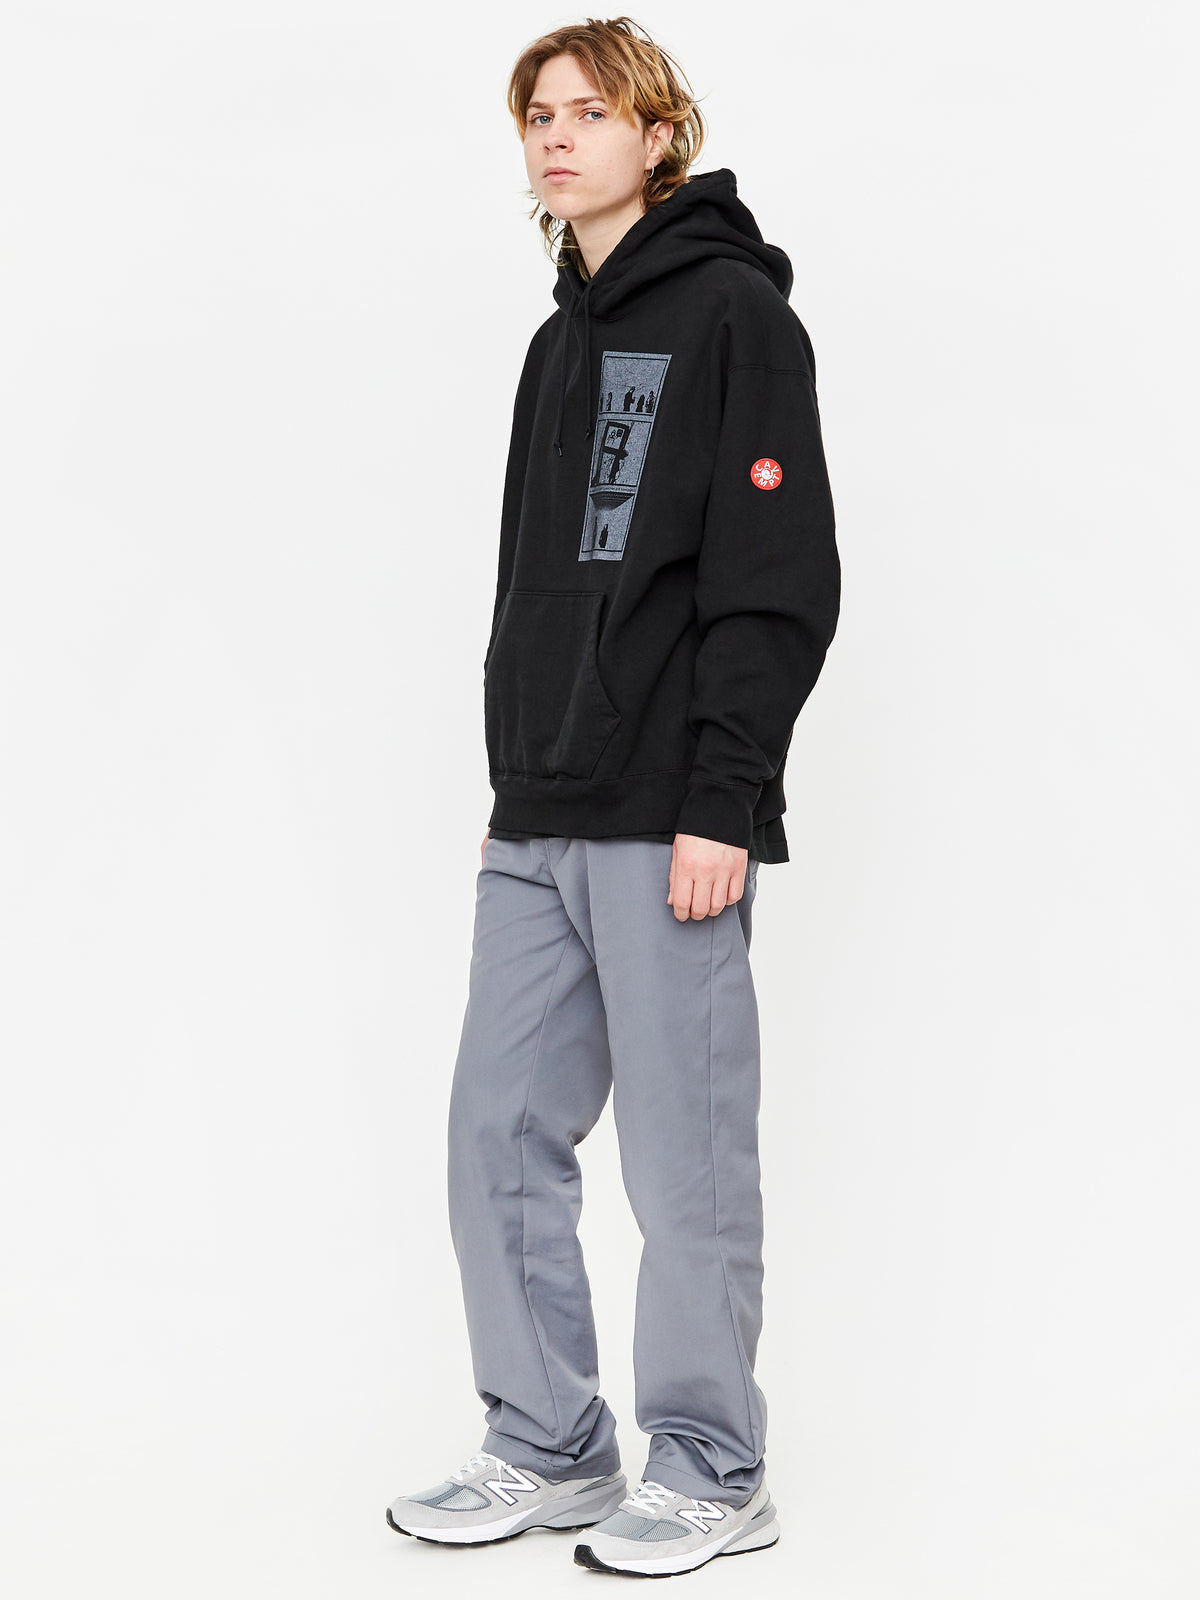 Explore our amazing collection of C.E Cav Empt Overdye Planetary